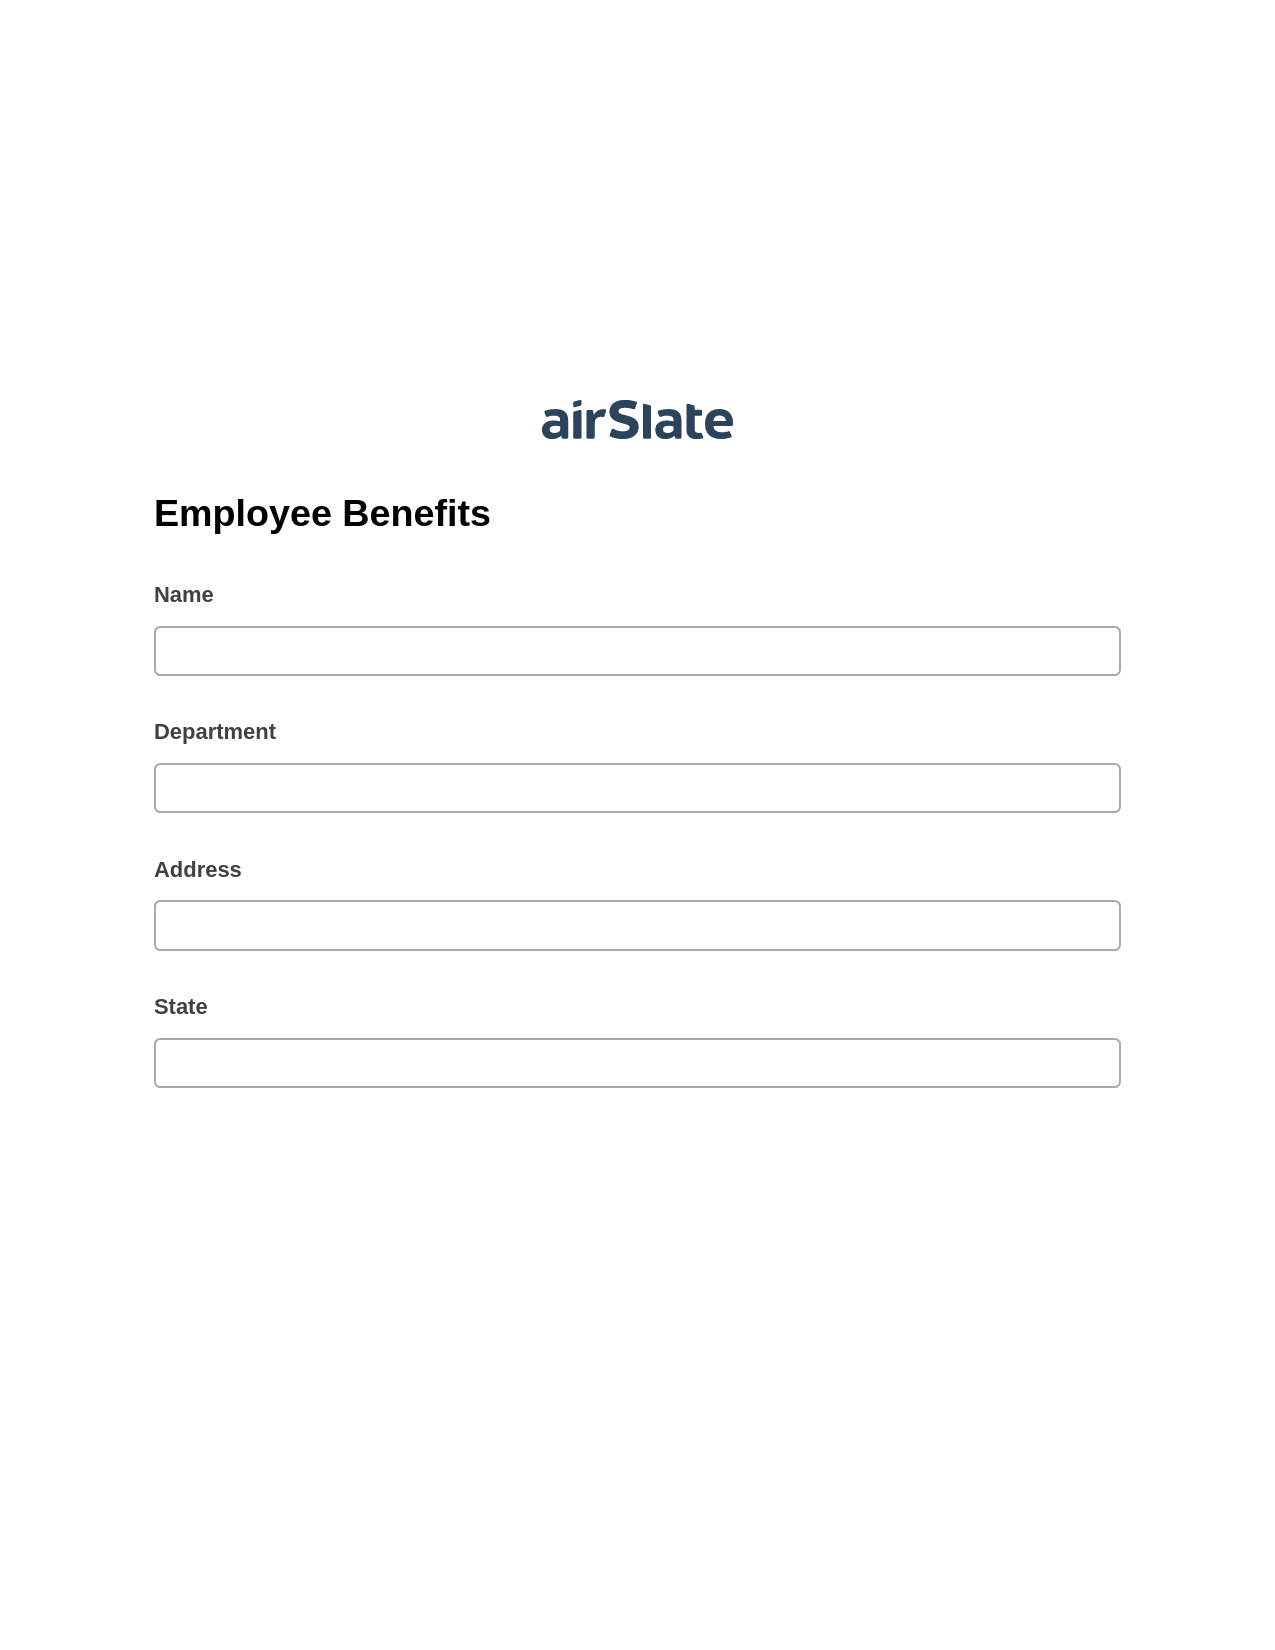 Multirole Employee Benefits Pre-fill from another Slate Bot, Google Cloud Print Bot, Export to Excel 365 Bot